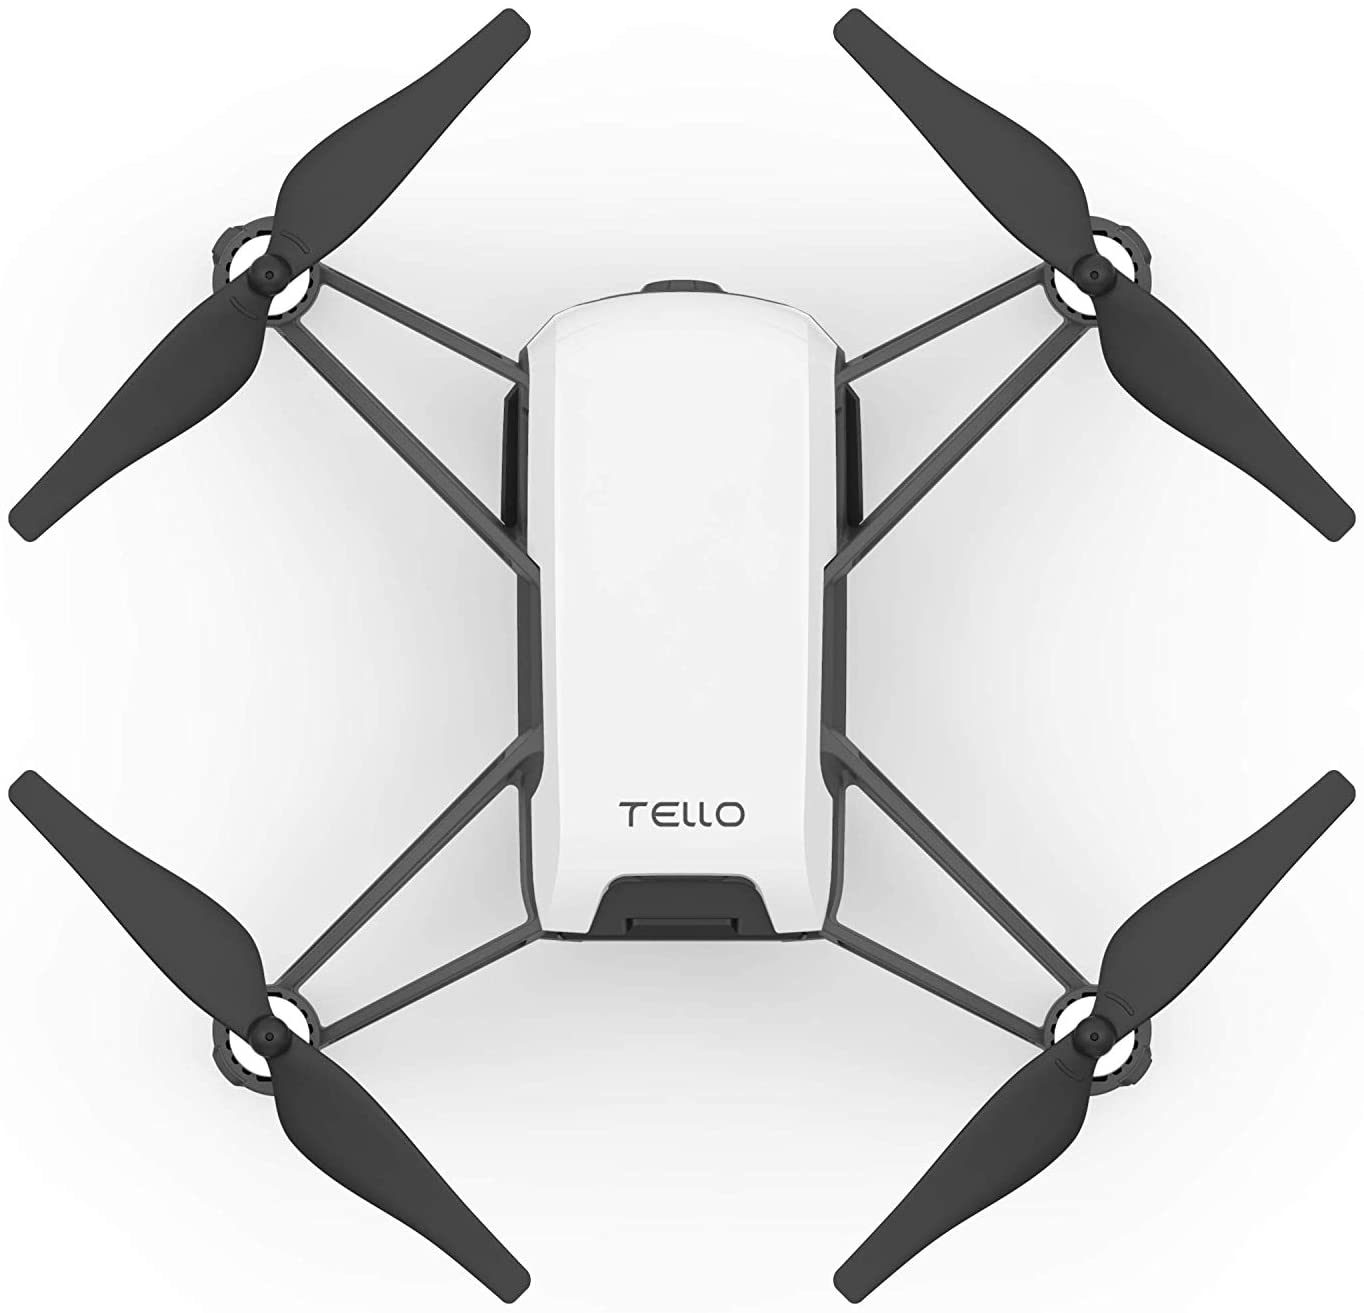 Ryze Tech Tello - Mini Drone Quadcopter UAV for Kids Beginners 5MP Camera HD720 Video 13min Flight Time Education Scratch Programming Toy Selfies, powered by DJI, White - image 3 of 3